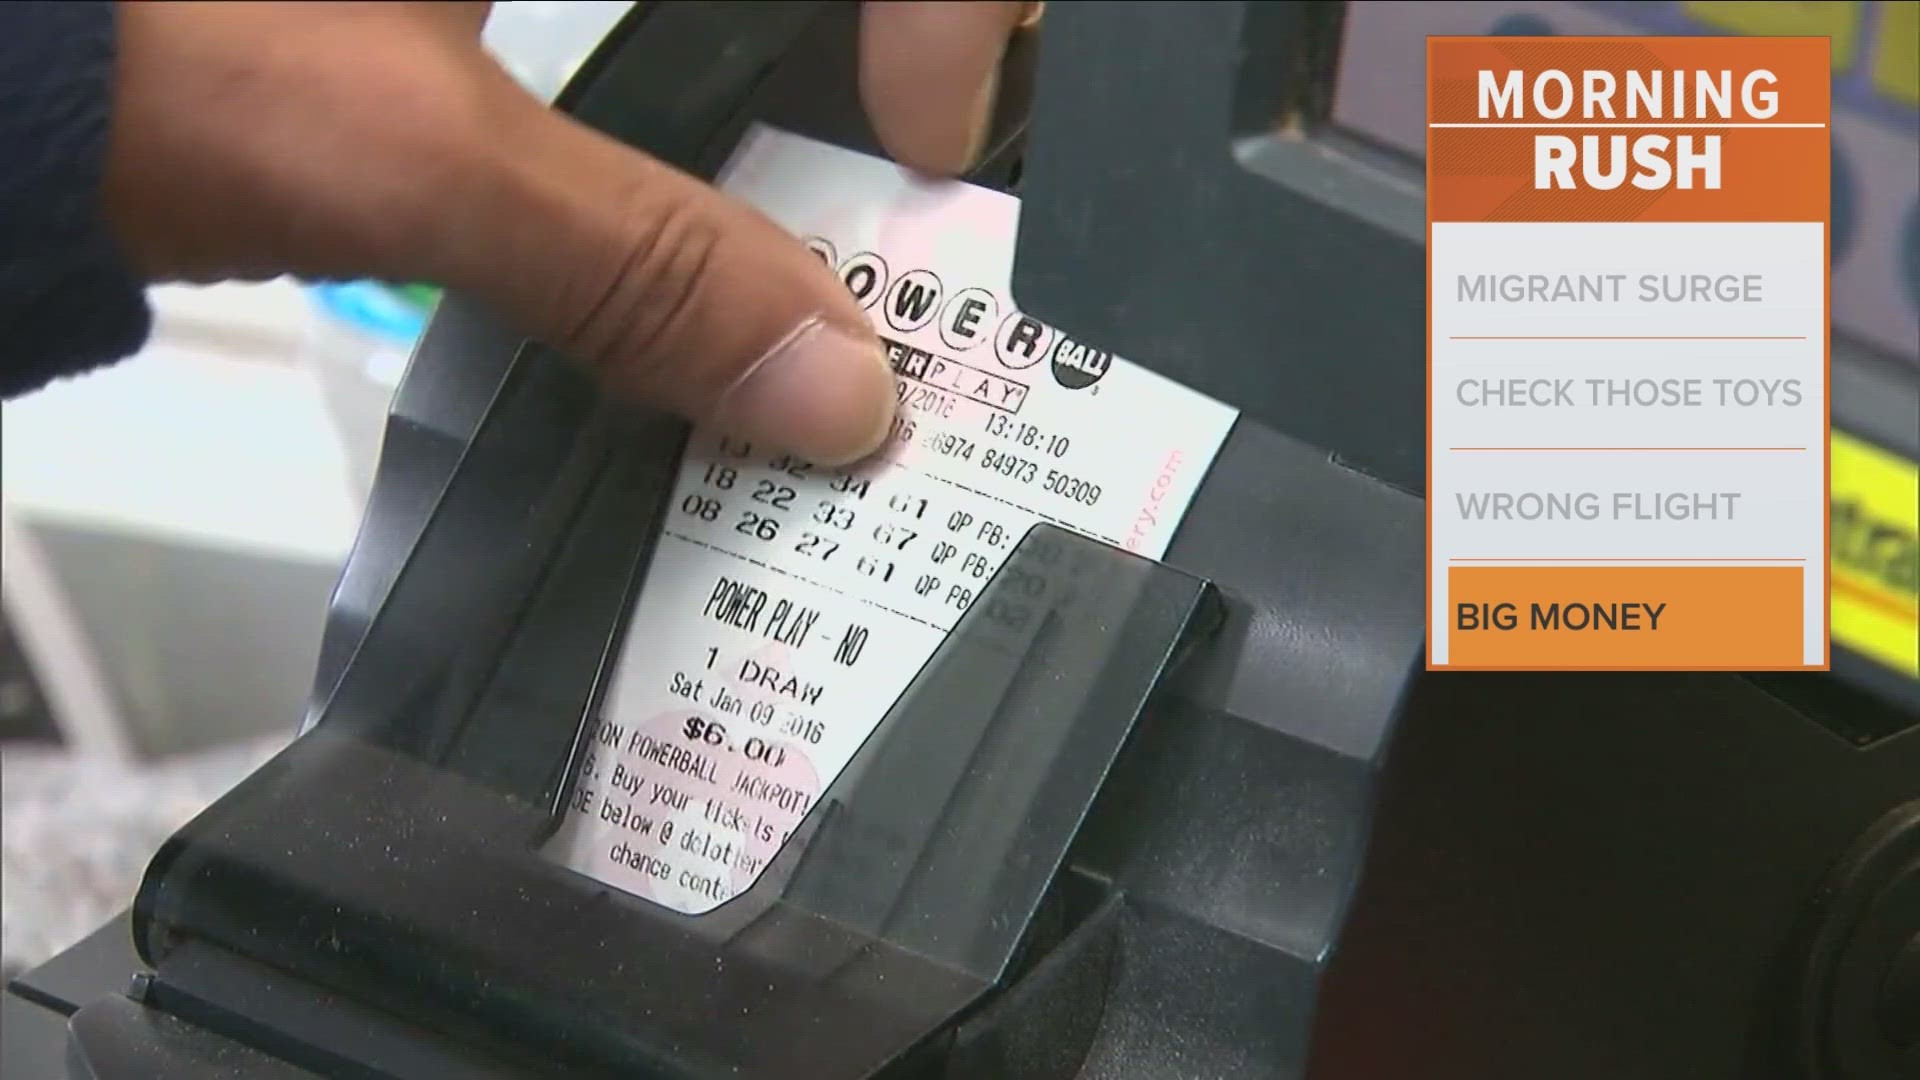 The estimated prize for Wednesday's drawing is $685 million.